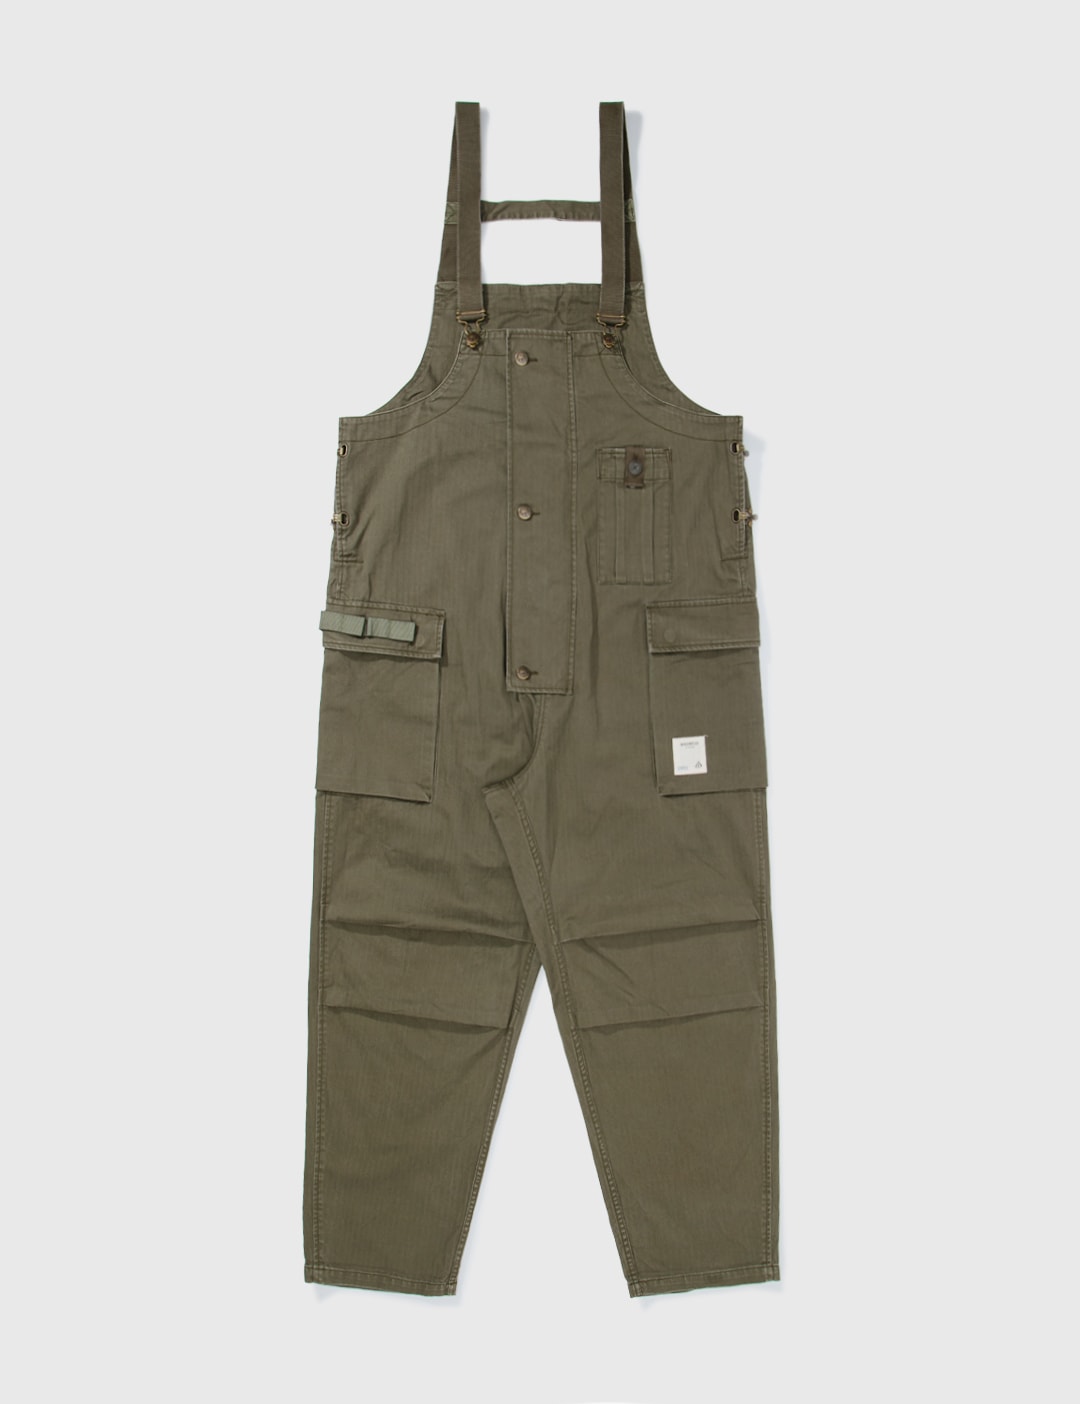 Verhandeling Versterker Geplooid Madness - Military Overall | HBX - Globally Curated Fashion and Lifestyle  by Hypebeast